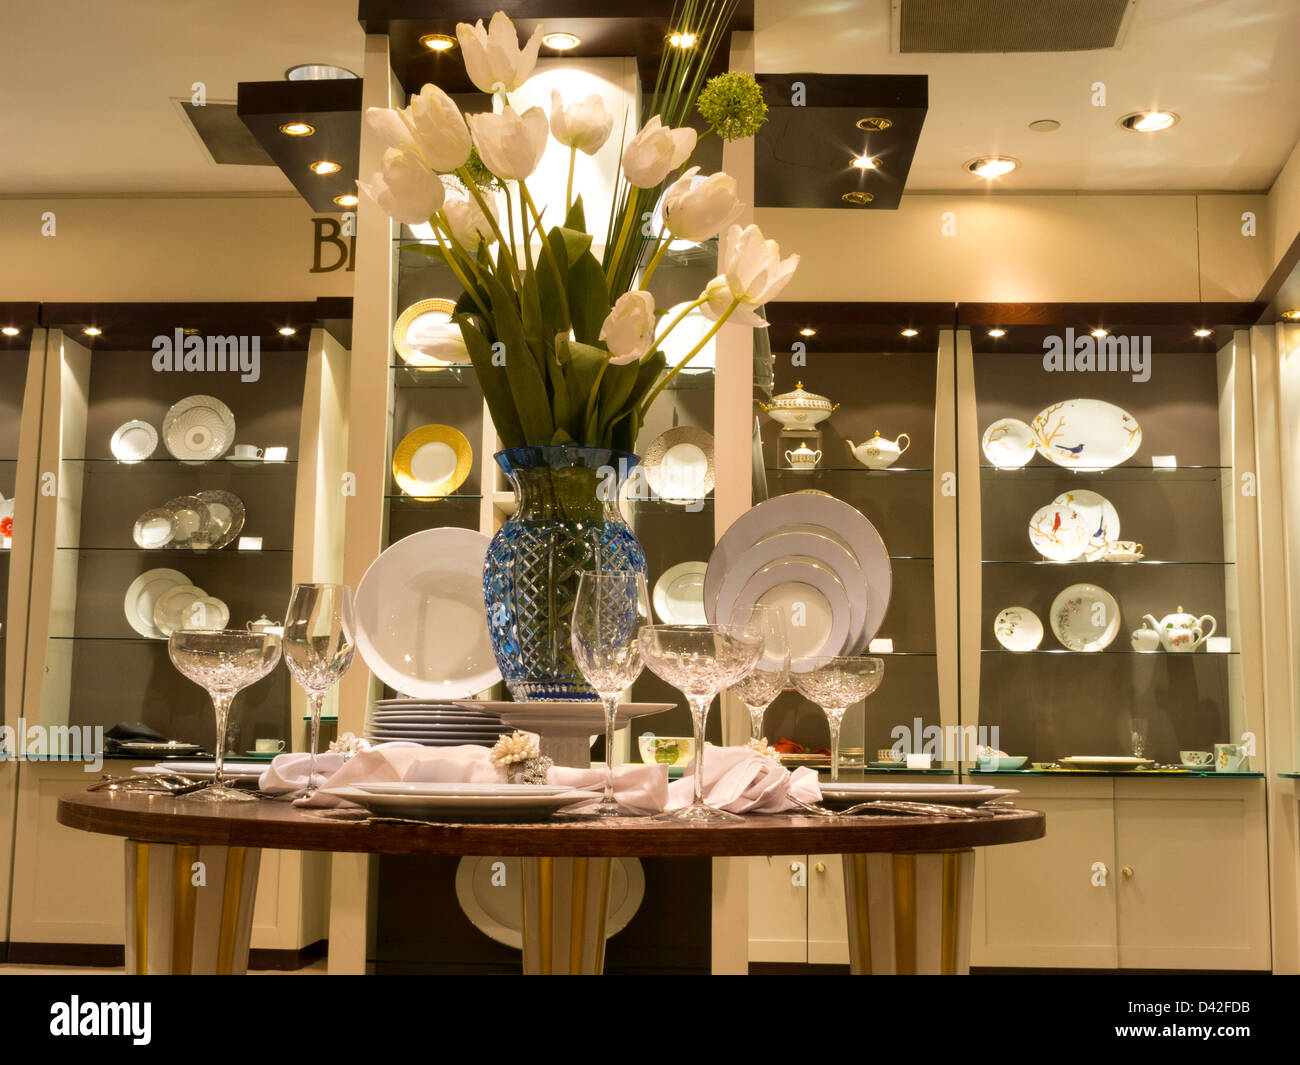 China and Crystal Display, Bloomingdale's Department Store Interior, NYC Stock Photo